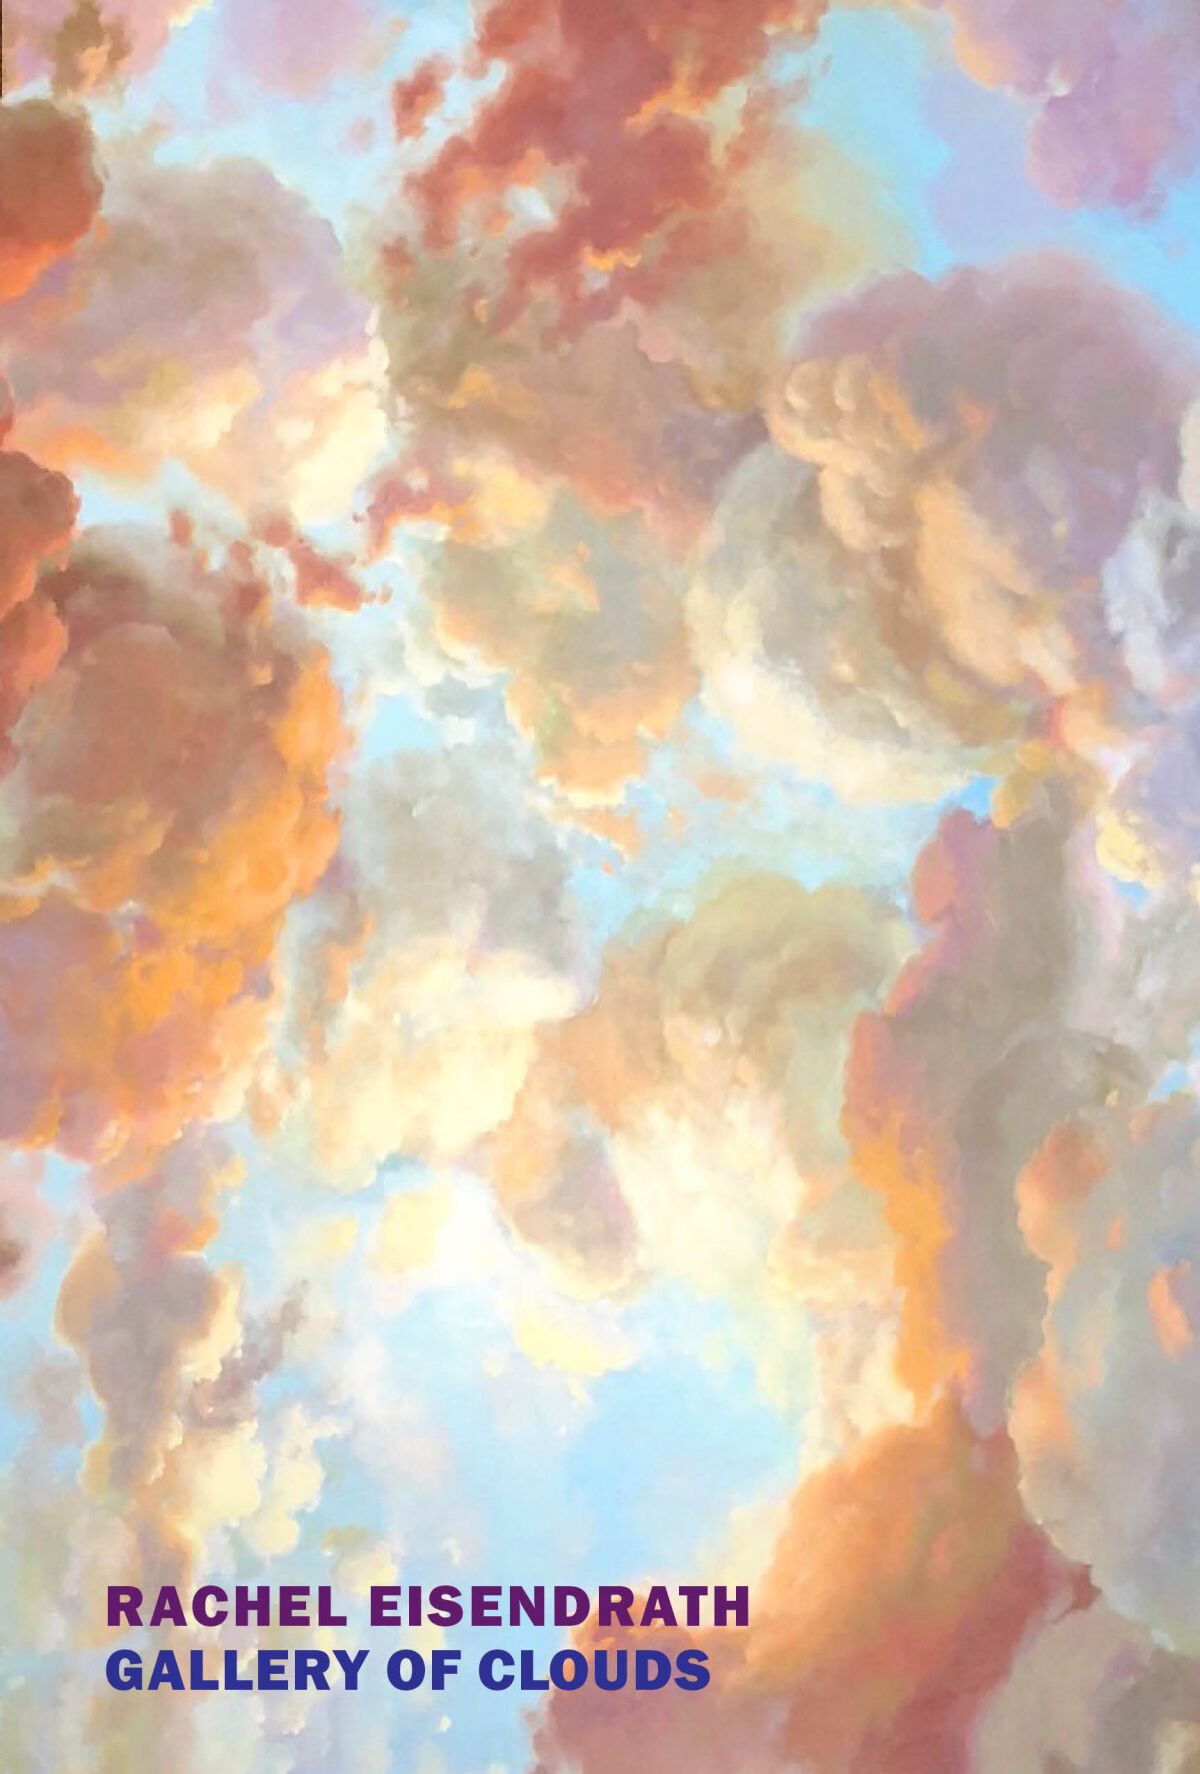 Eisendrath's Gallery of Clouds